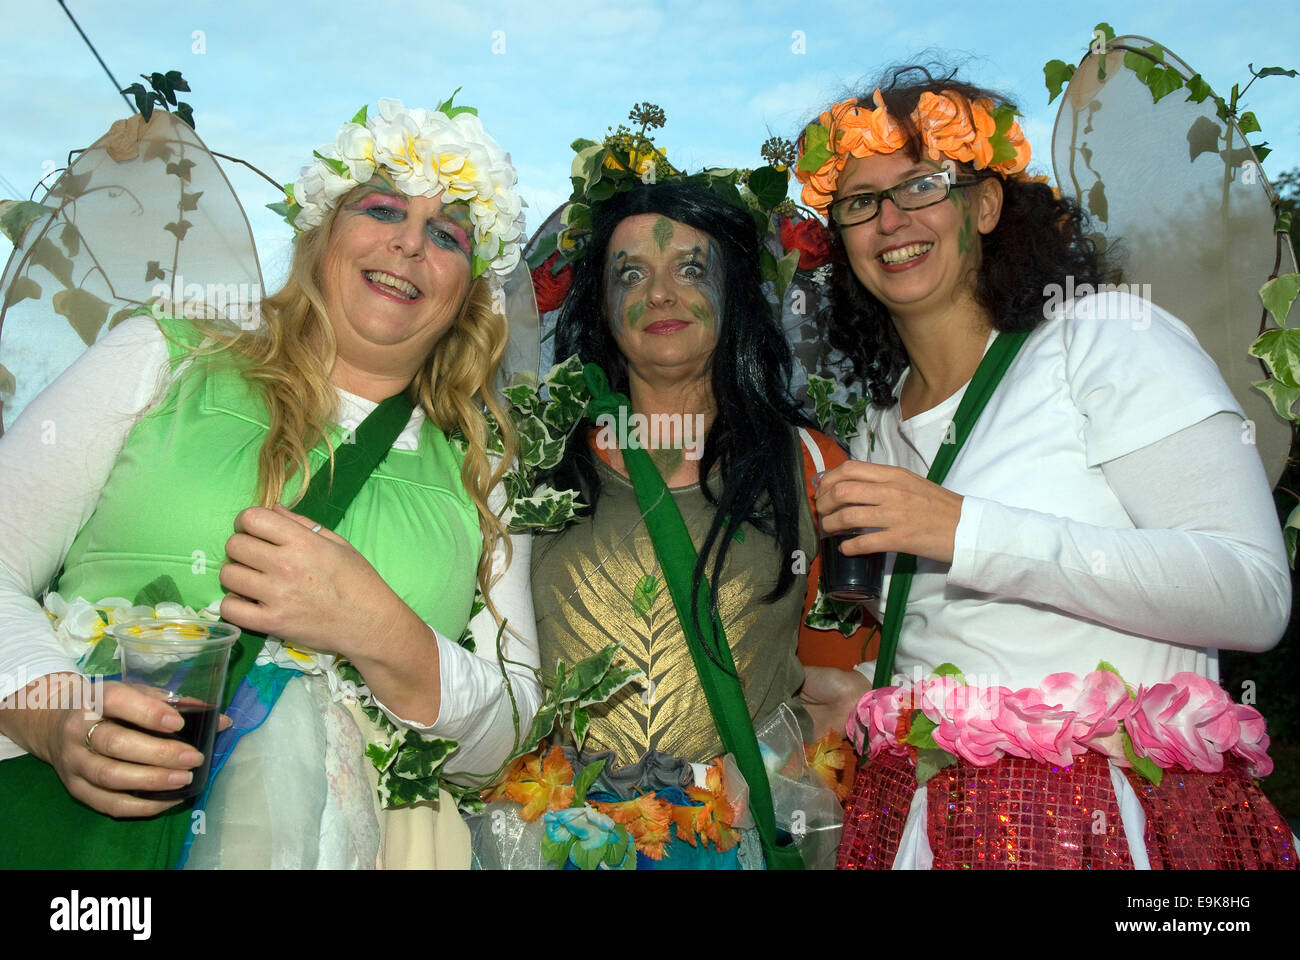 3 females in fancy dress costume at Liphook Carnival, 25 October 2014, Liphook, Hampshire, UK. Stock Photo